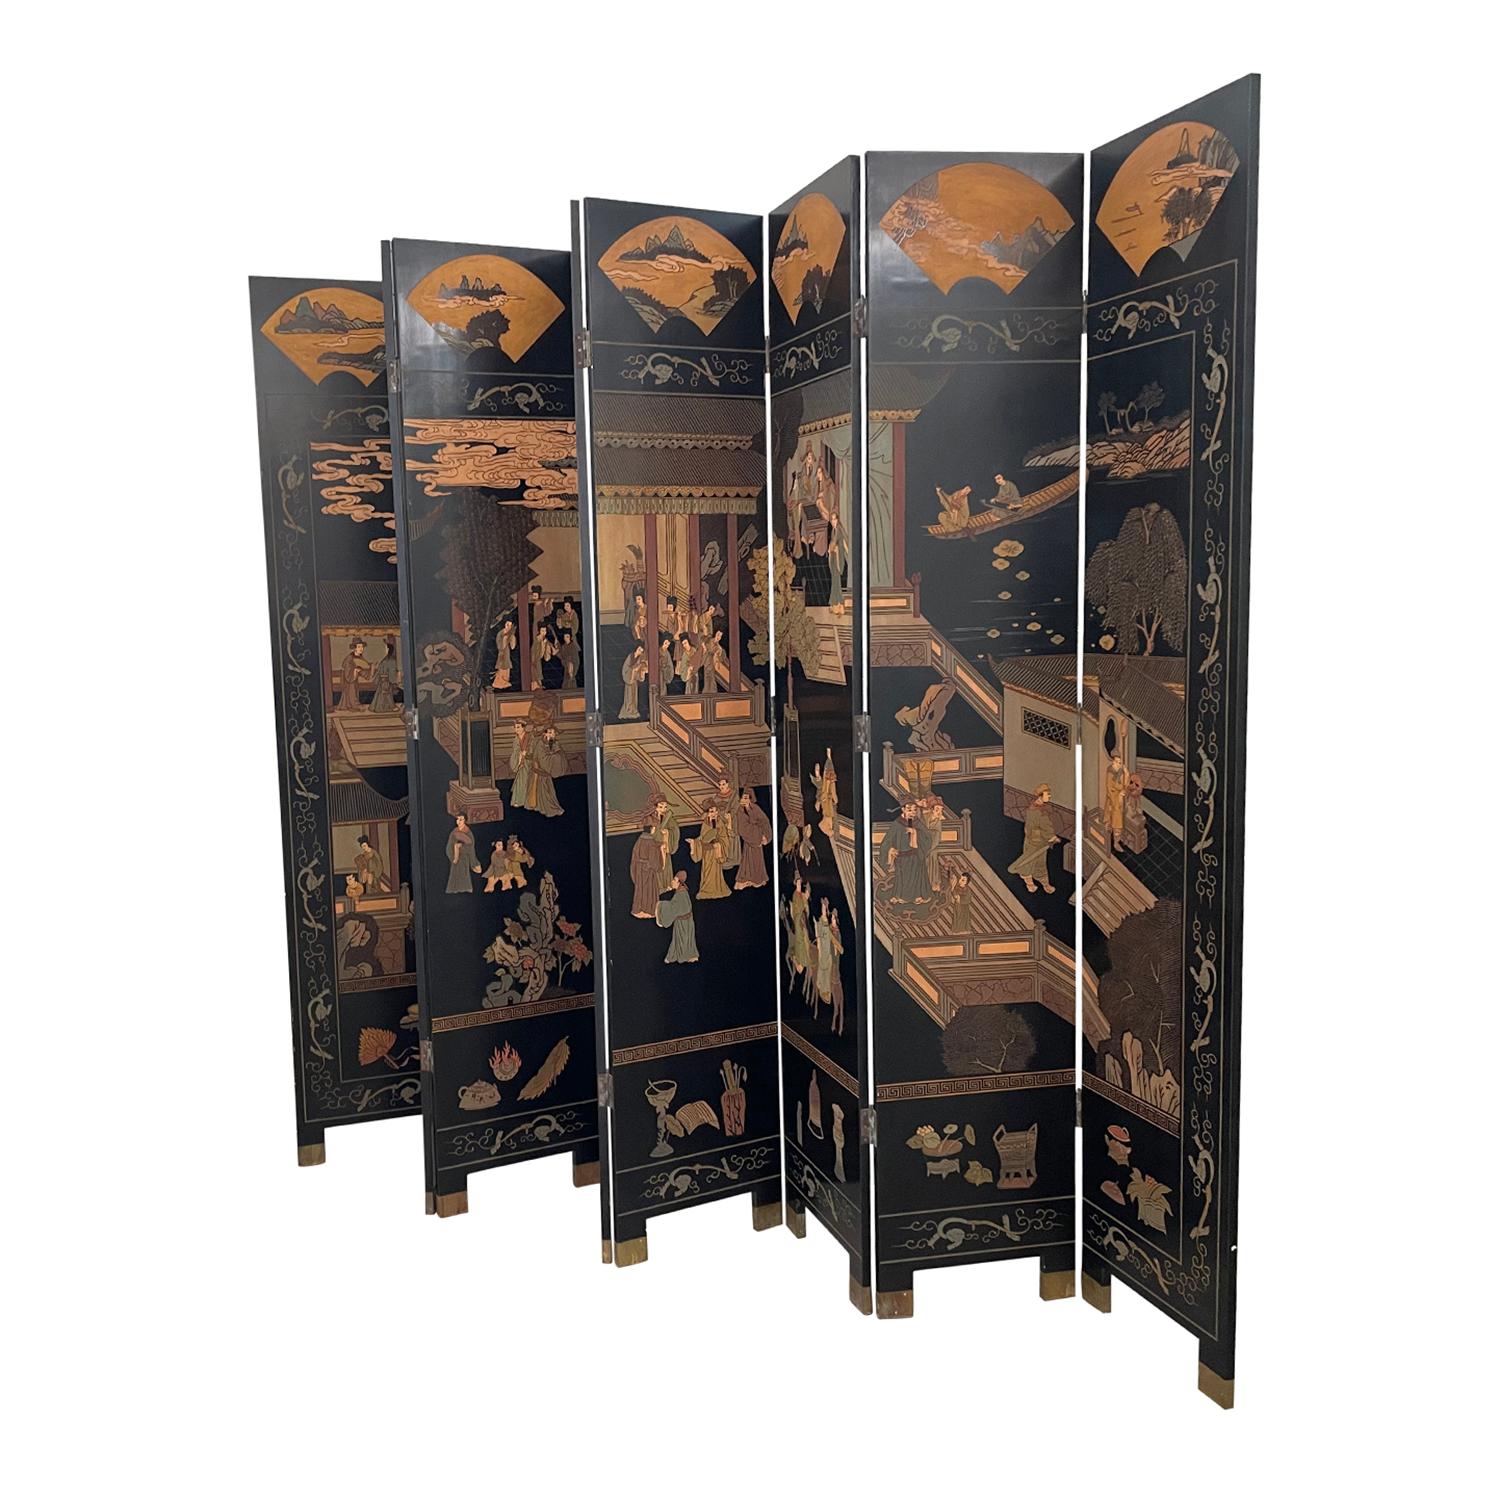 Chinoiserie 20th Century Black Chinese Lacquered Wood Screen, Vintage Room Divider For Sale